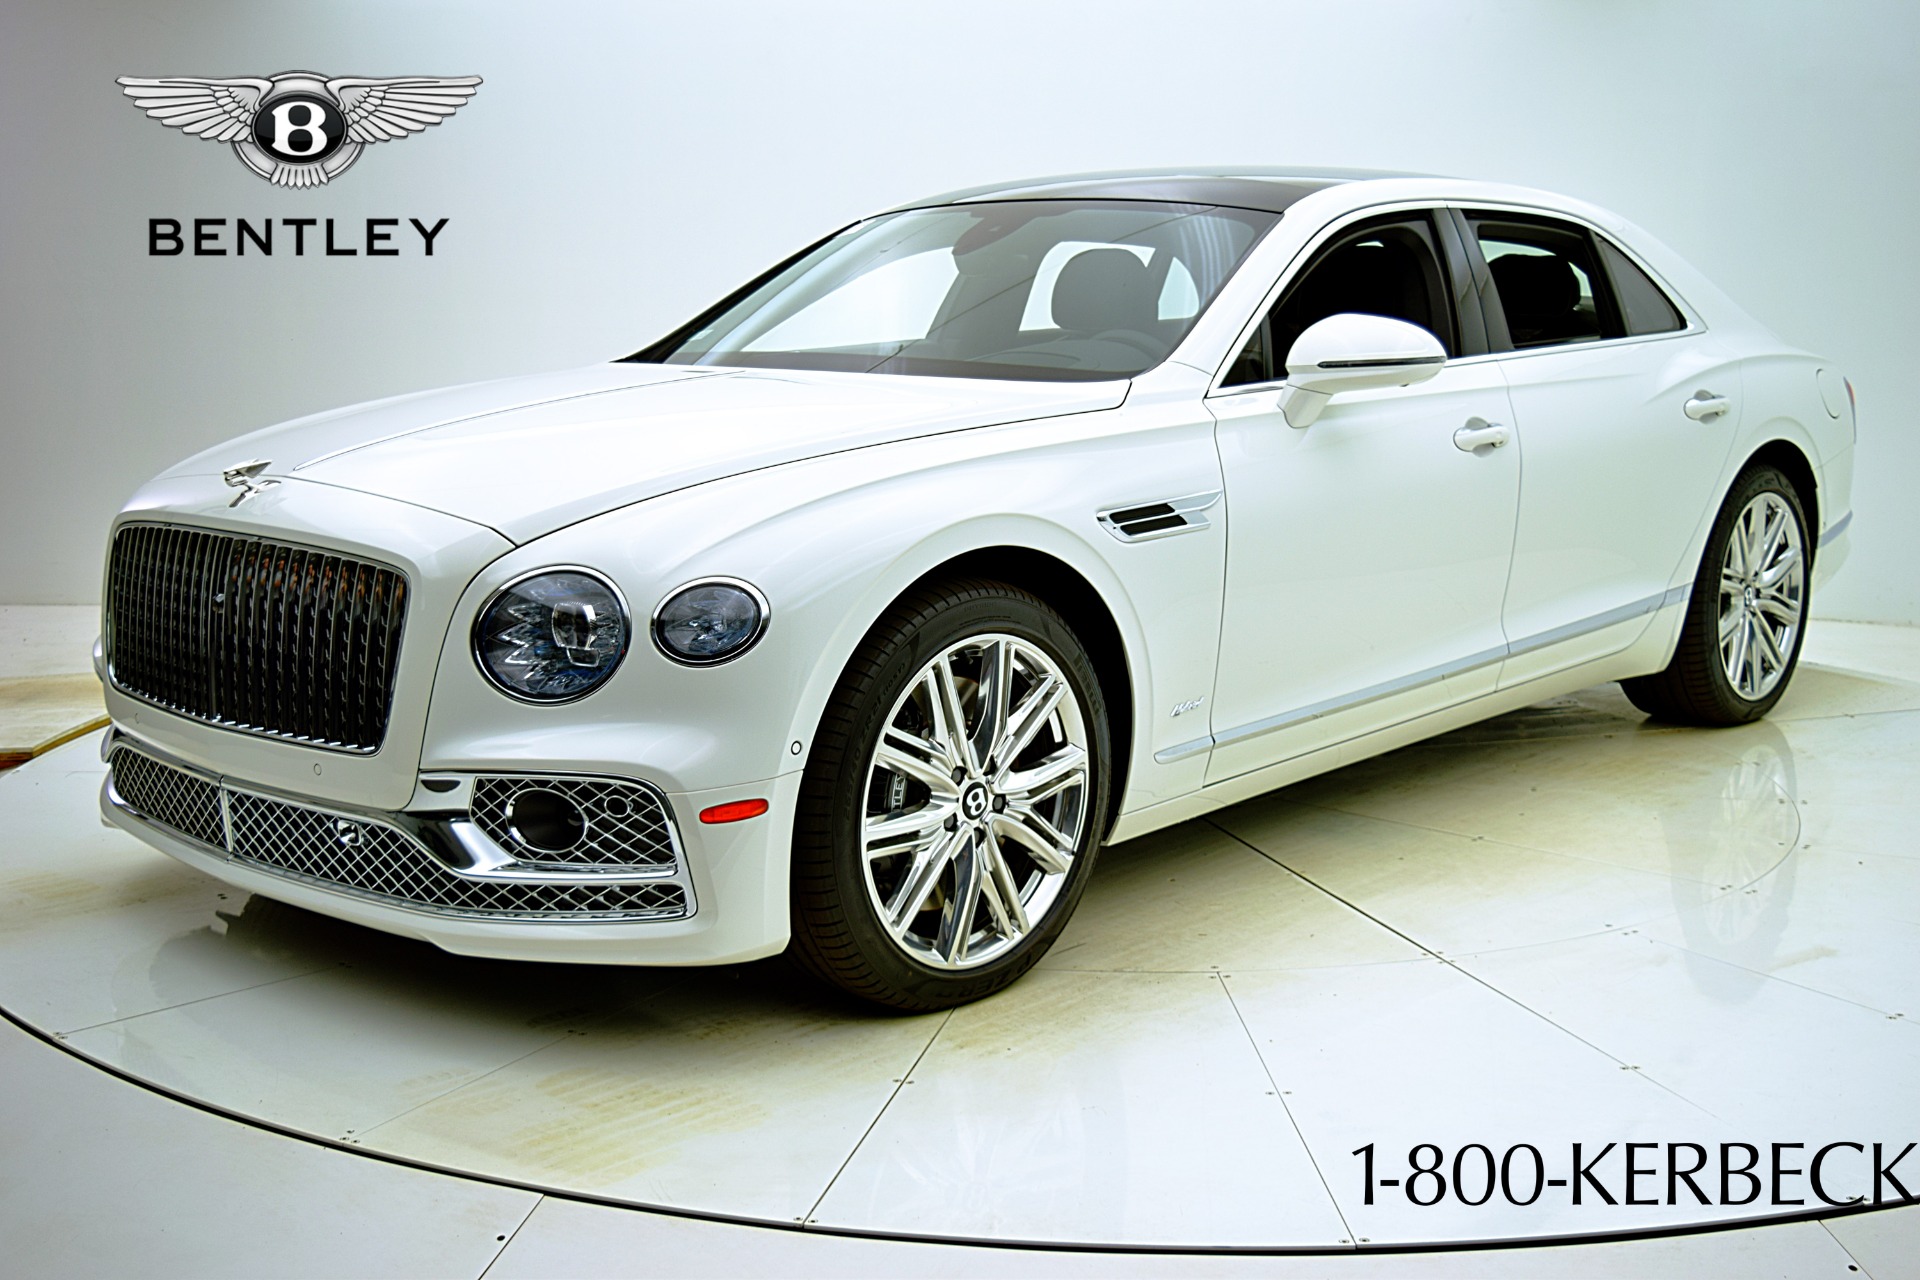 New 2022 Bentley Flying Spur Hybrid For Sale (Special Pricing) | Bentley  Palmyra N.J. Stock #22BE168